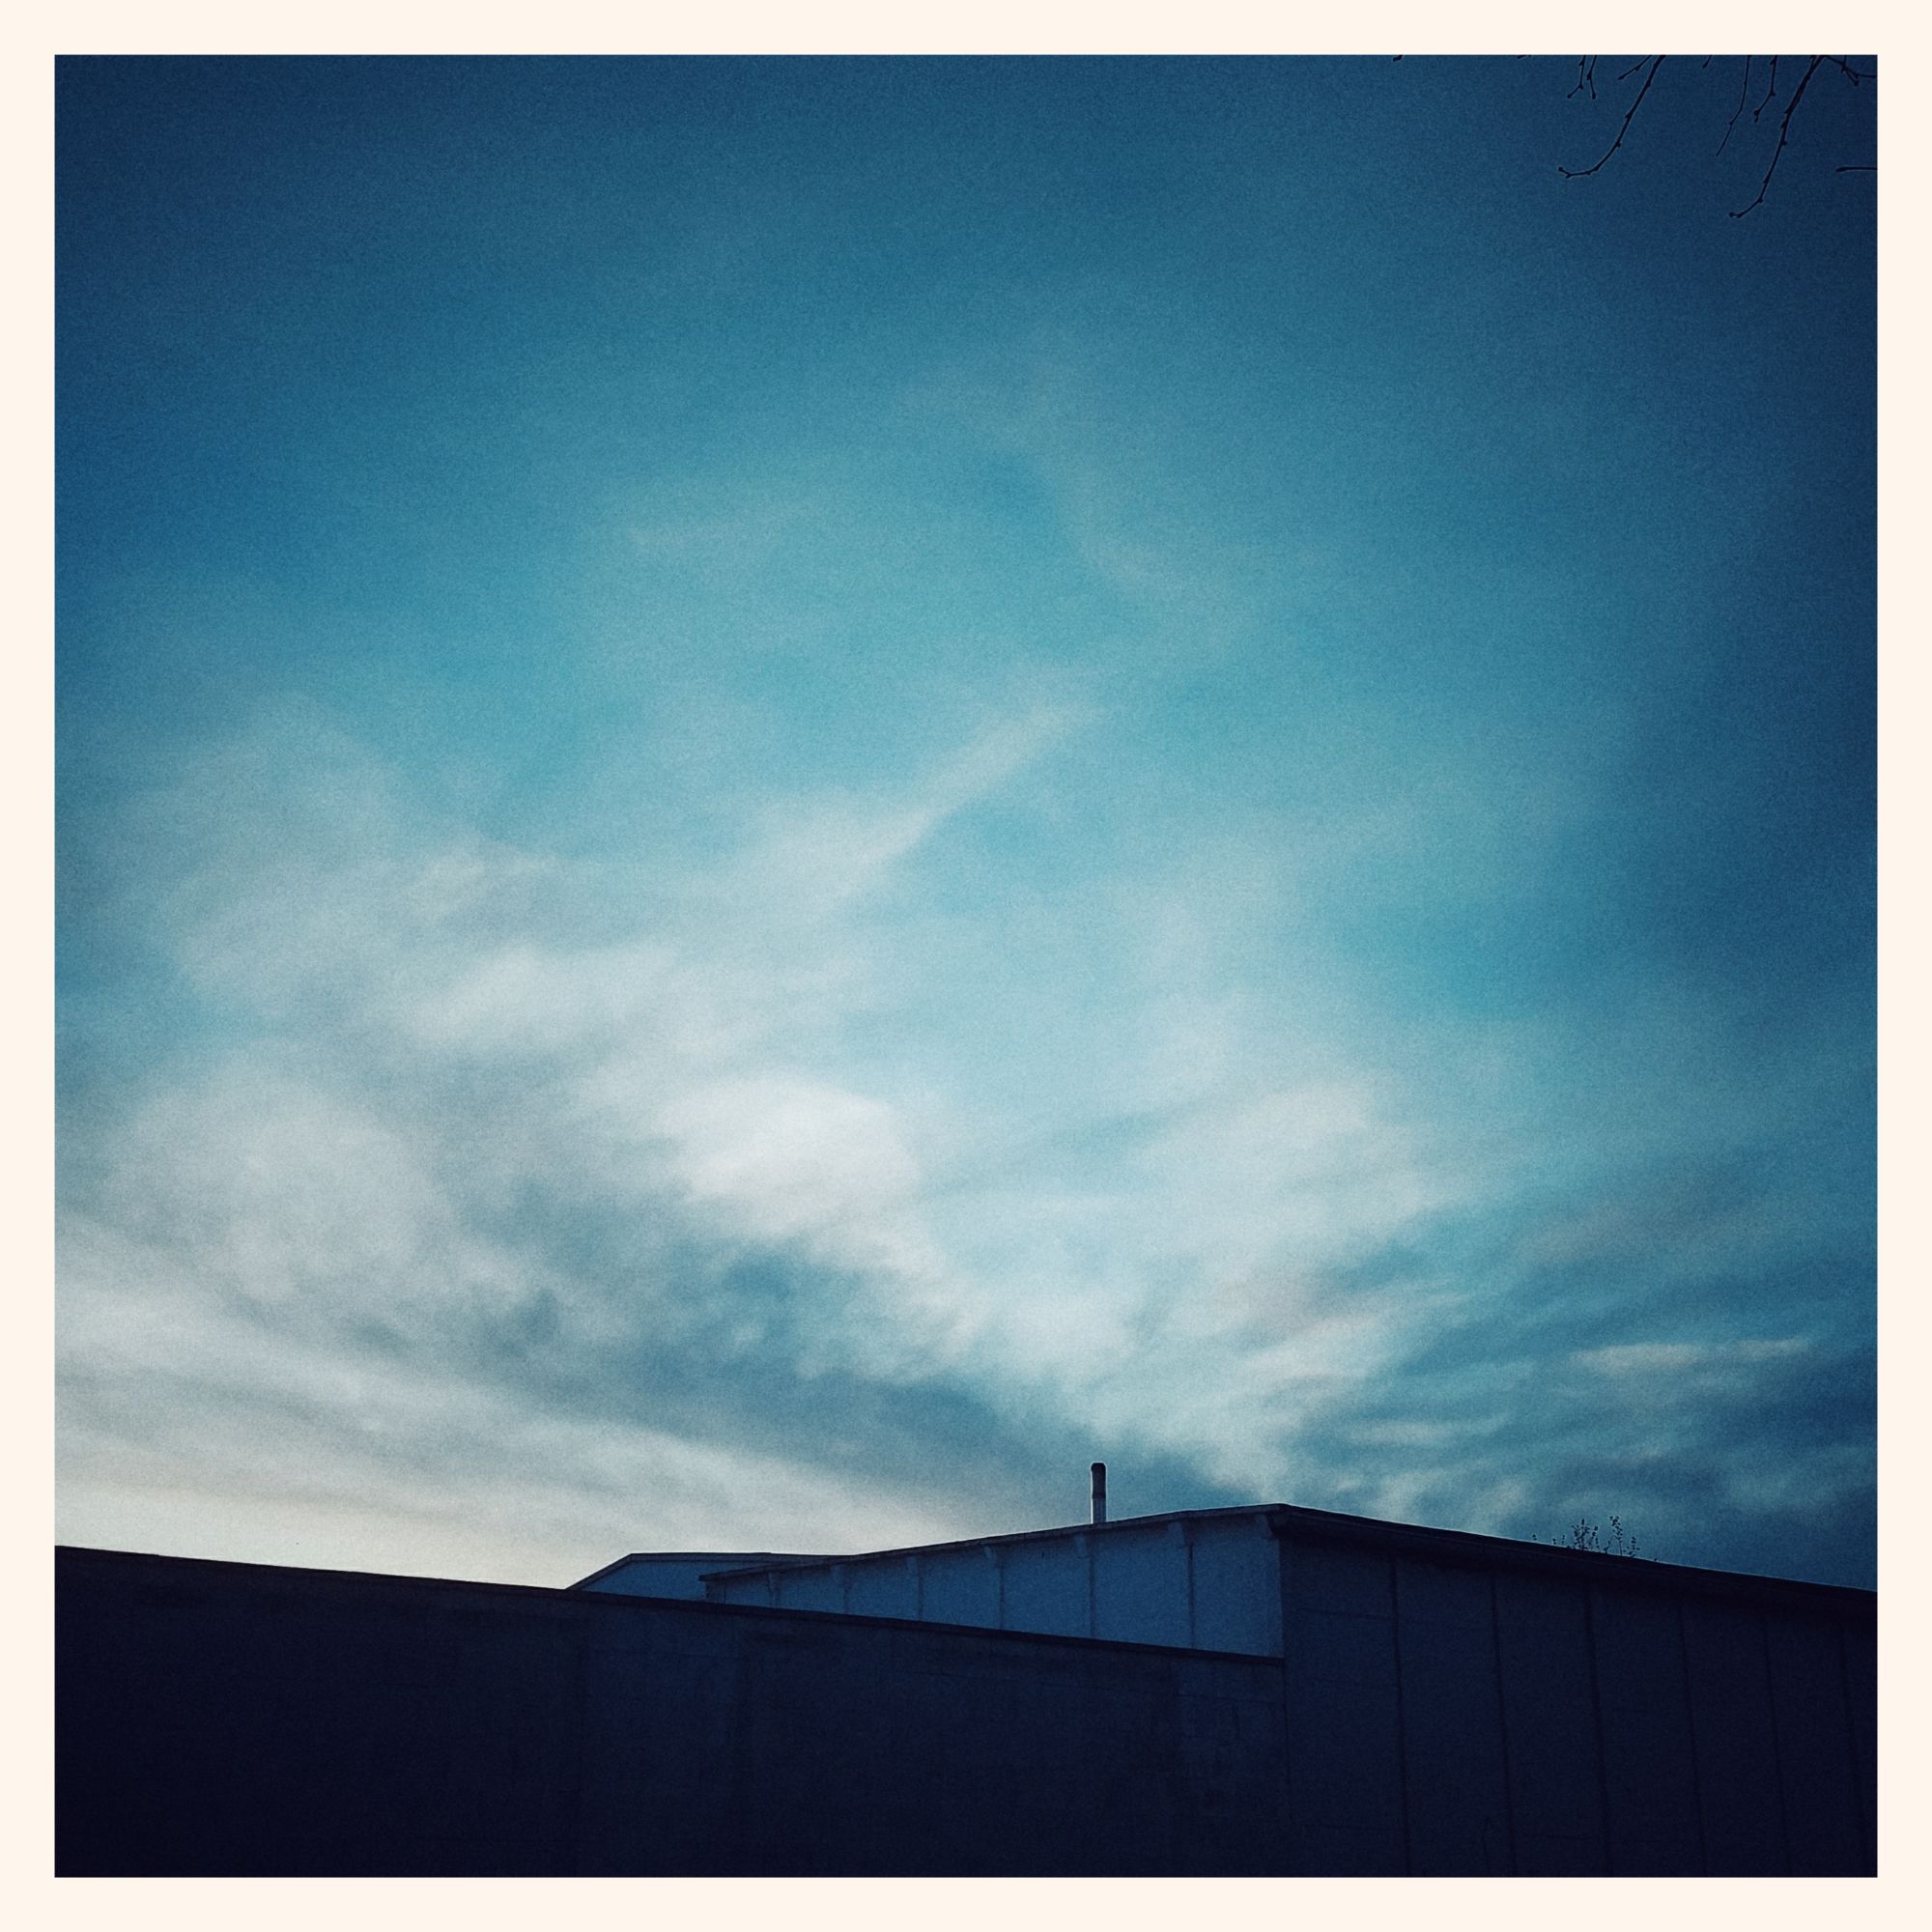 Early dusk sky, a slightly wing-shaped cloud and some last sunlight above flat roofs of industrial buildings.